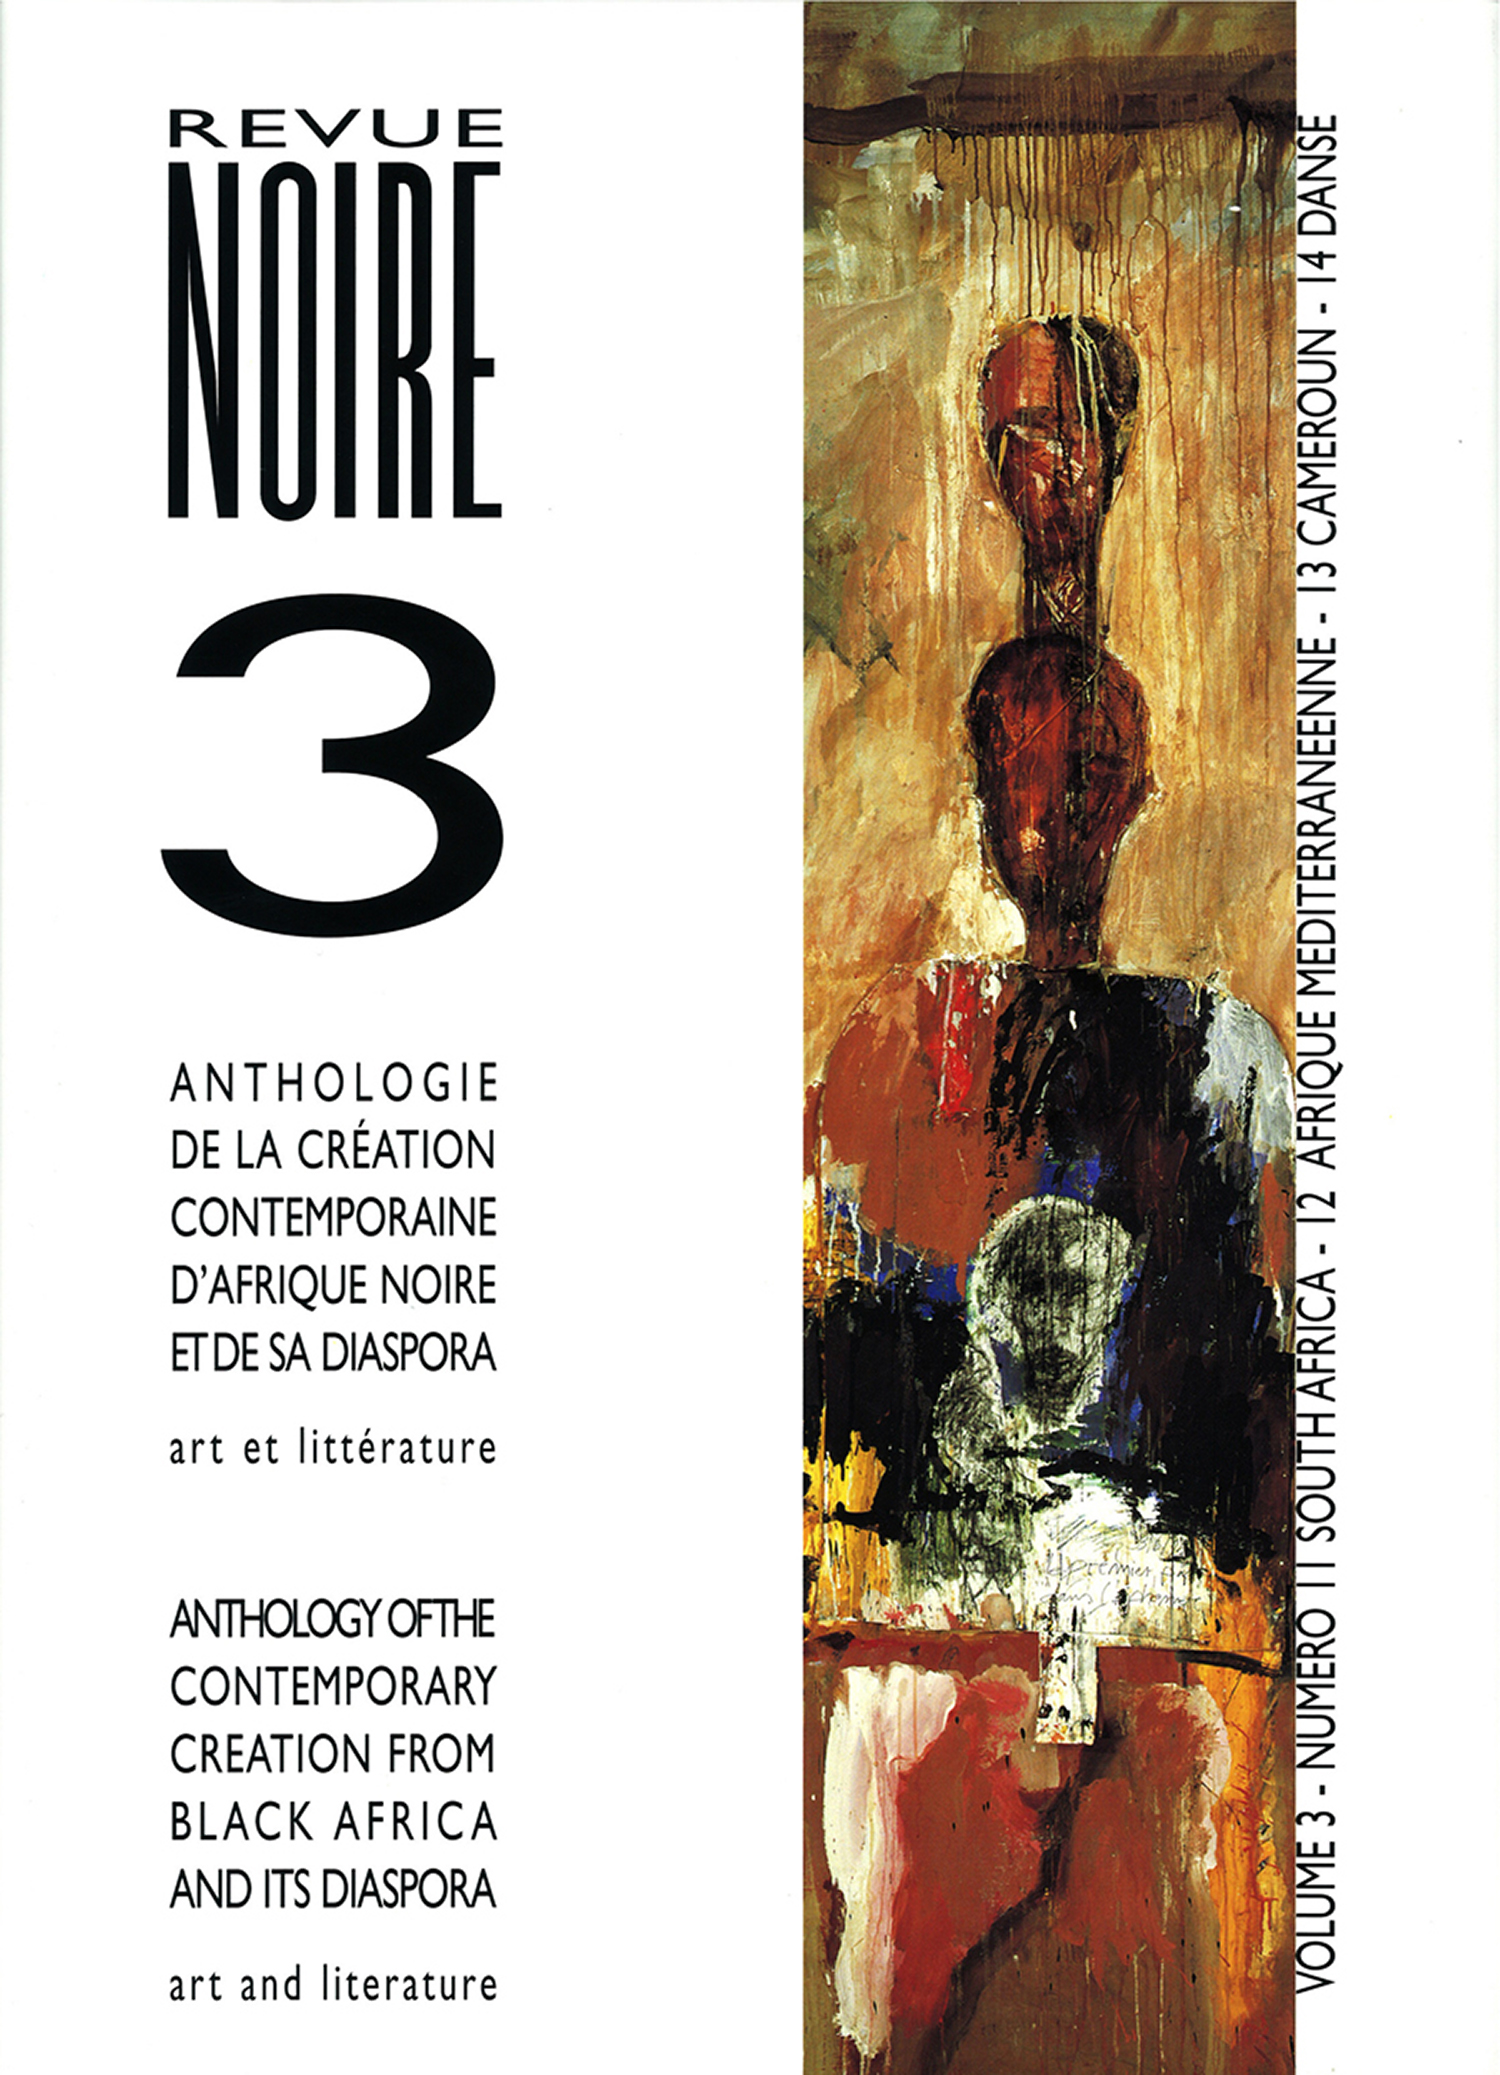 Book 'Anthology Revue Noire Magazine Vol. 03' issues 11 to 14